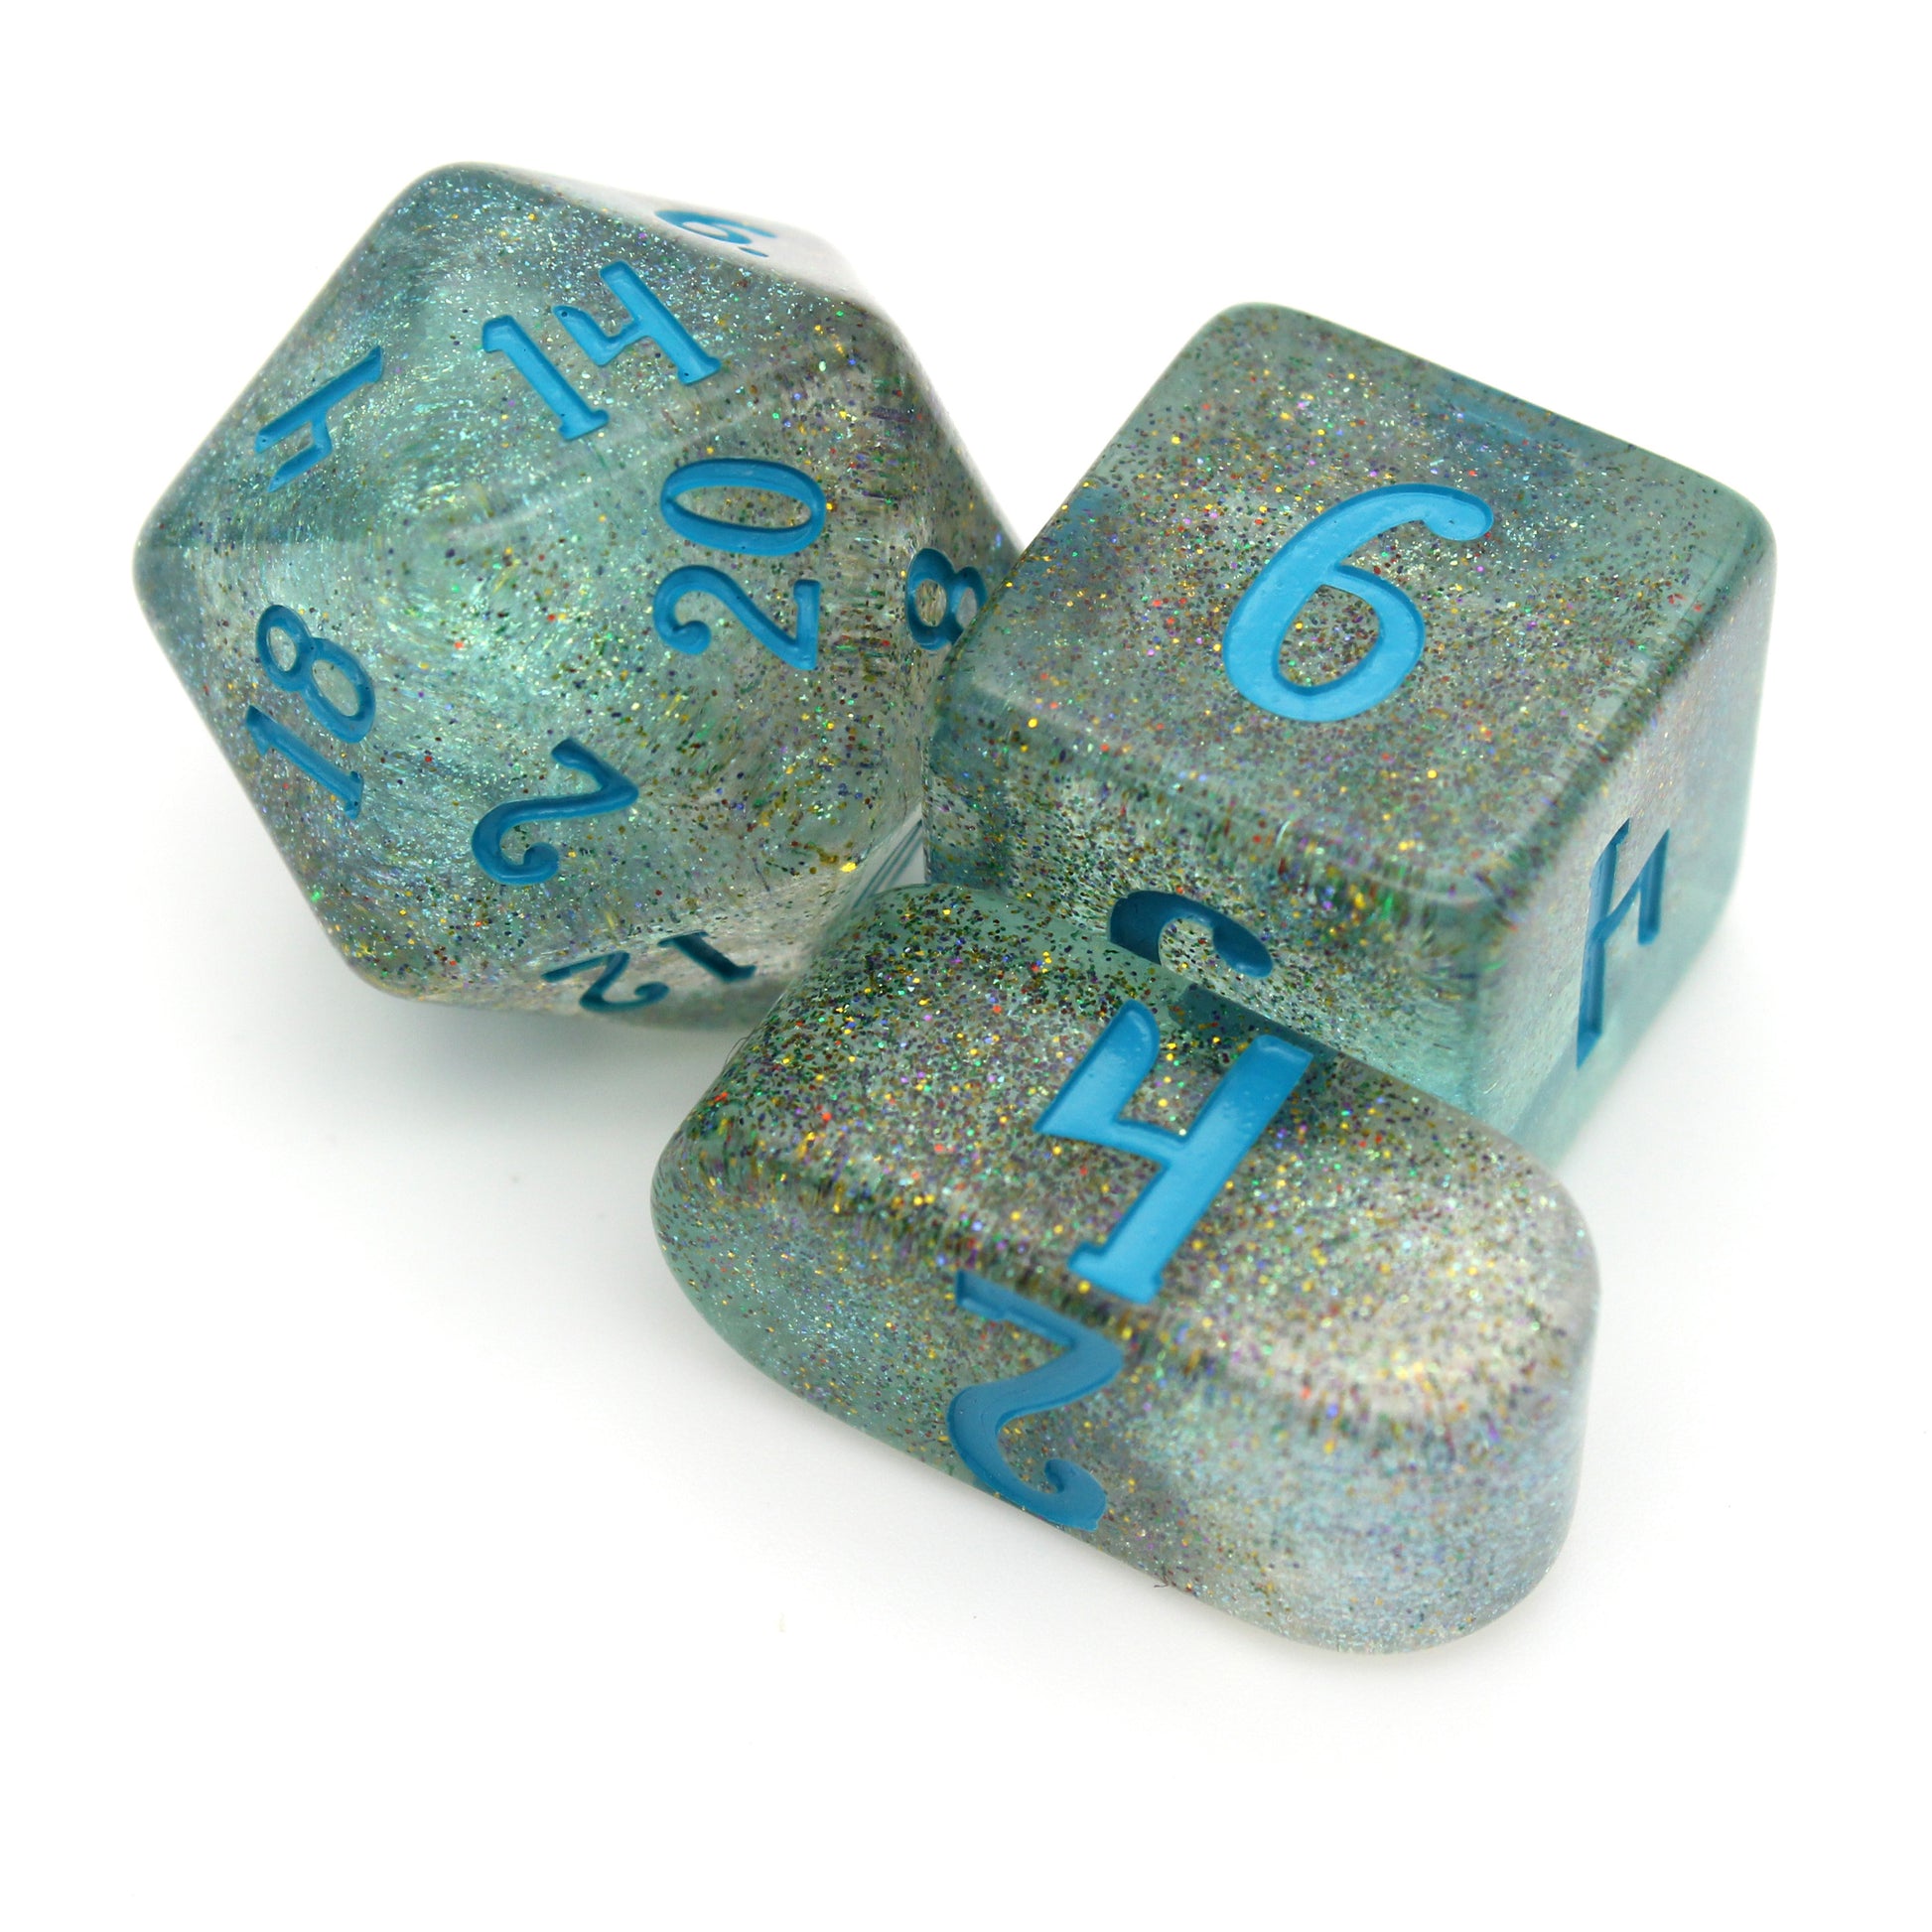 A closeup on a d20, d6, and infinity d4 from River Magic, a 10-piece dice set of swirling blue, brown, and clear resin, shot through with silver glitter and inked in teal.